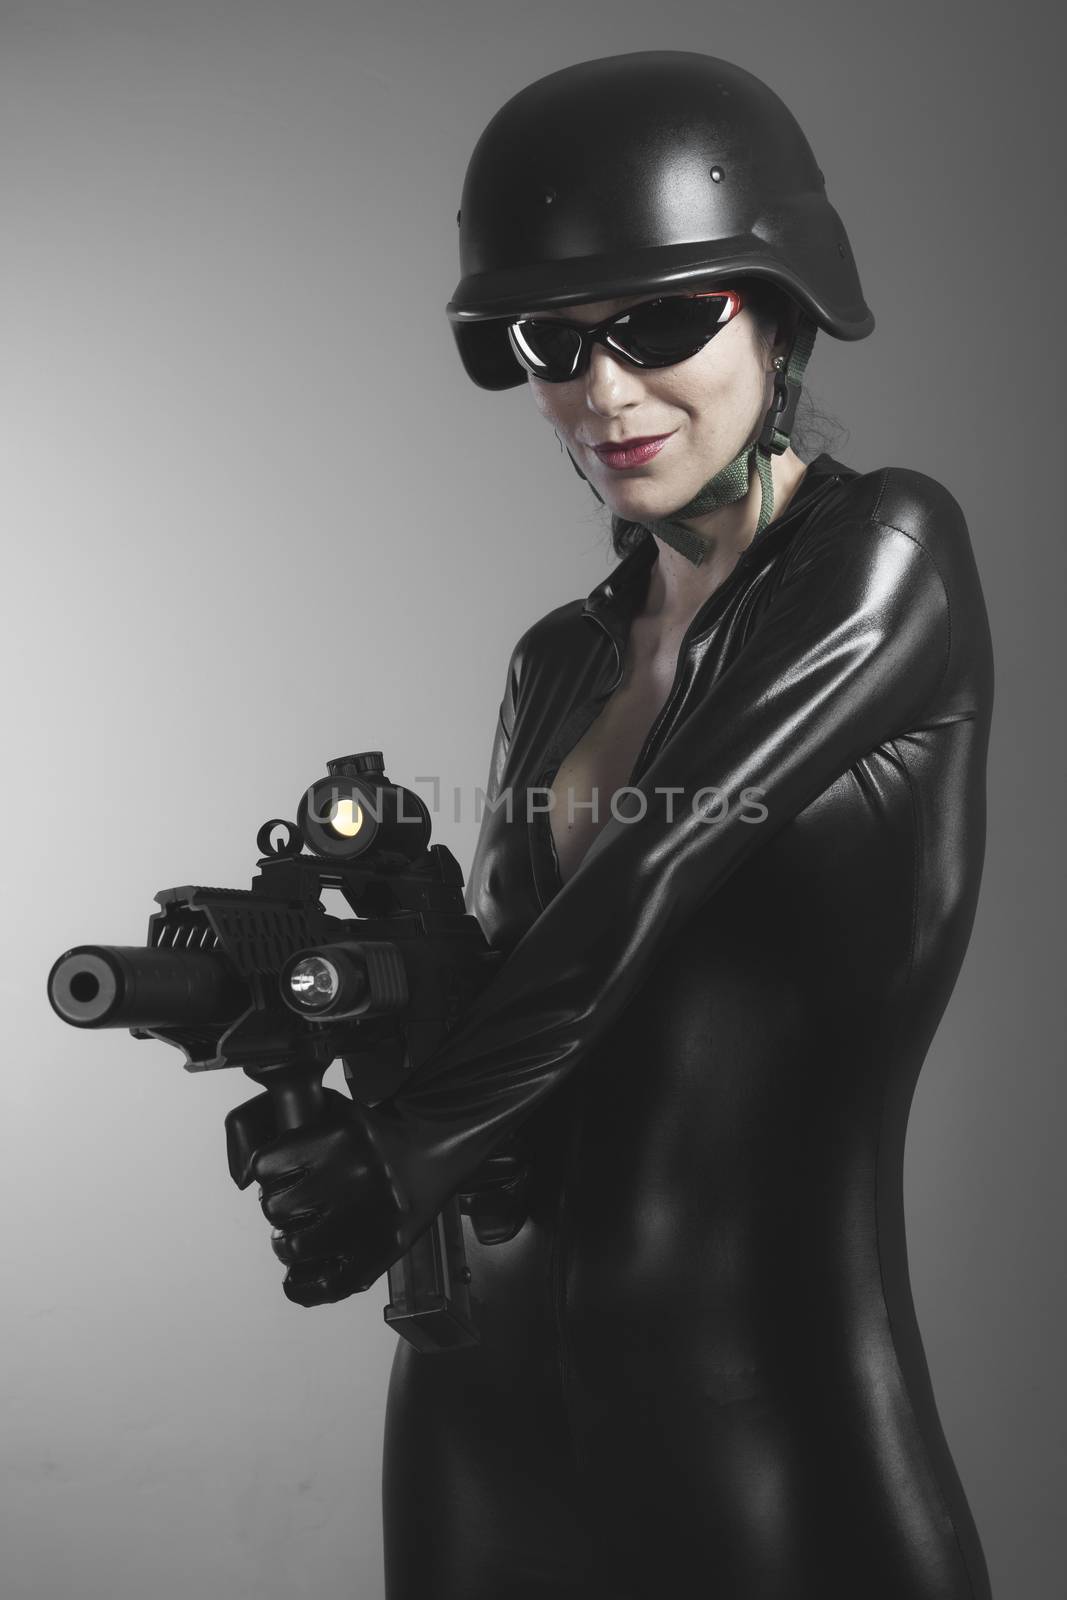 Fire, Brunette woman with enormous bulletproof vest and gun by FernandoCortes